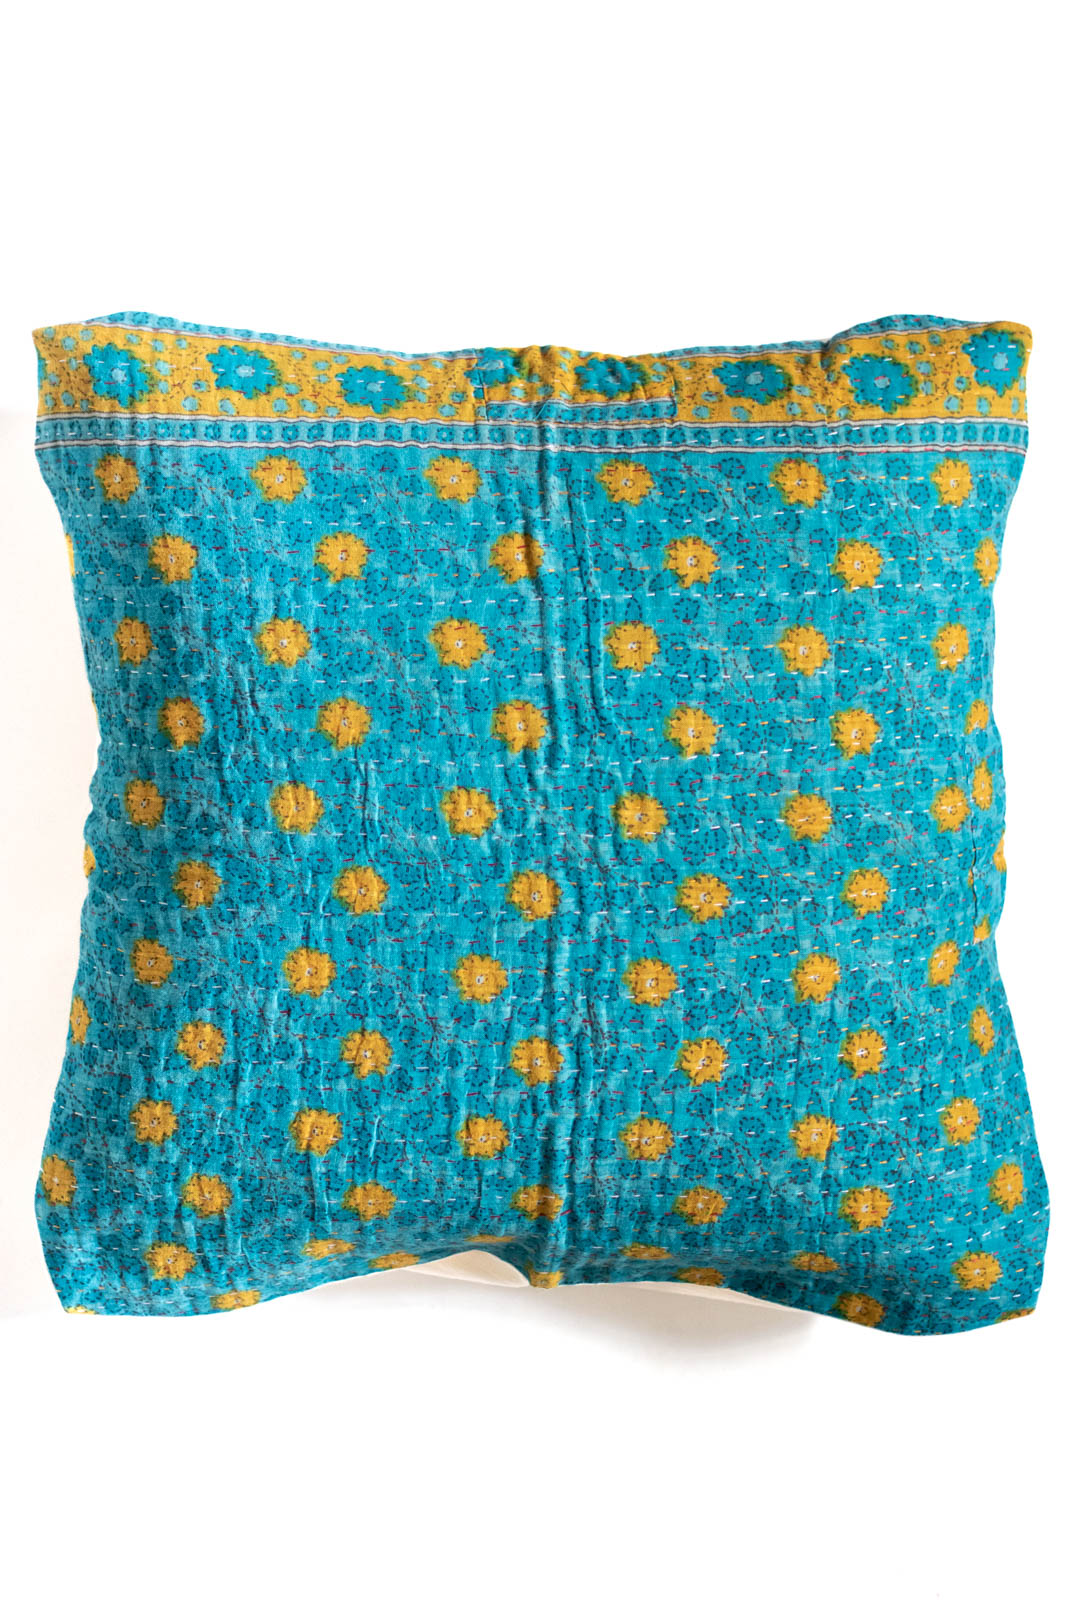 Worth no. 5 Kantha Pillow Cover